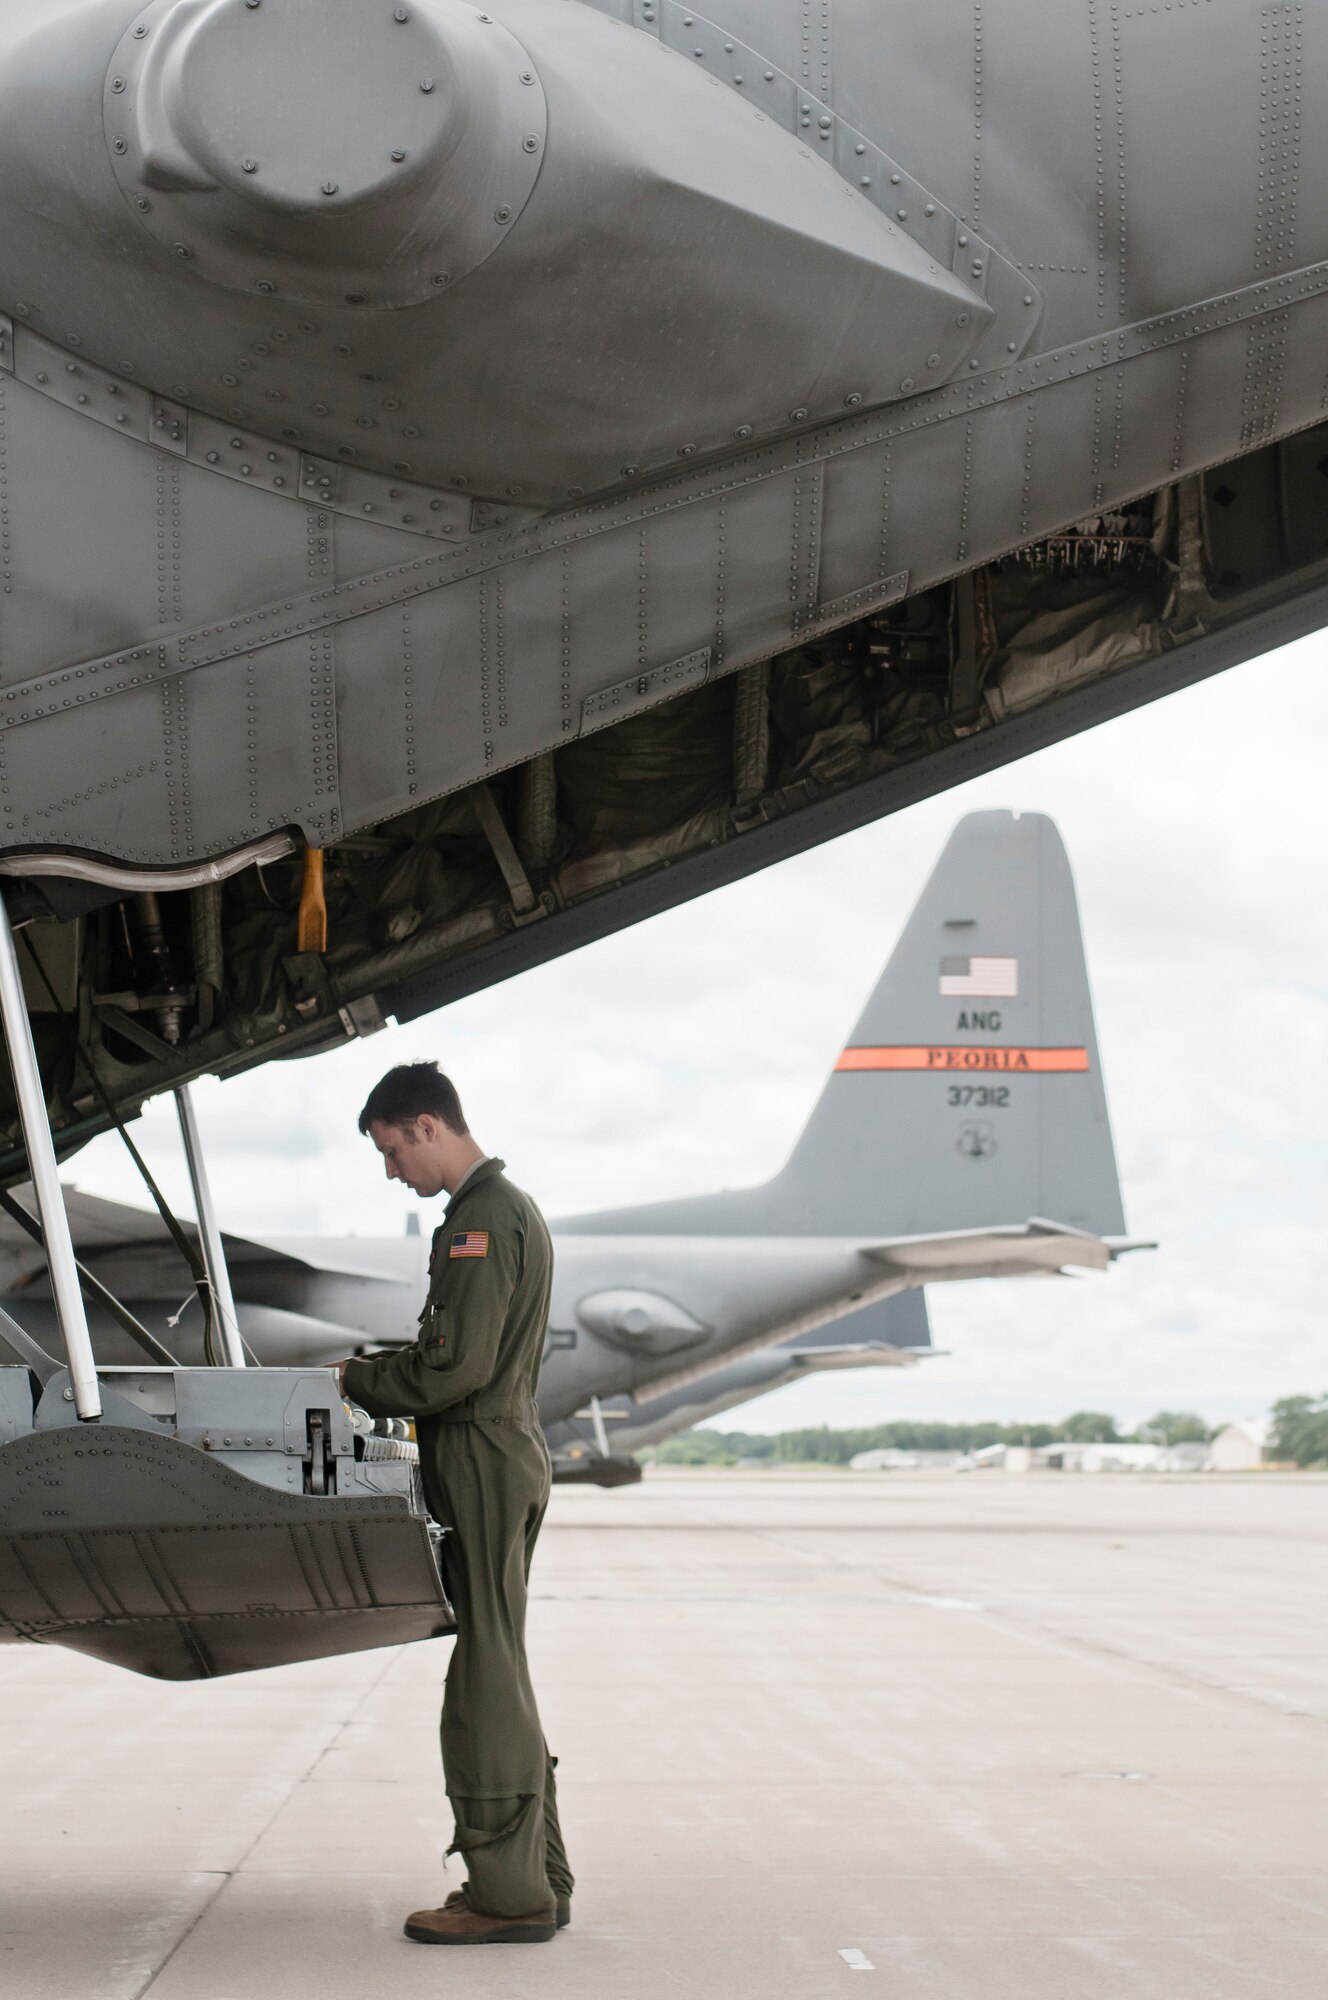 U.S. Air Force Senior Airman Nick J. Barth, an aircraft loadmaster with the 169th Airlift Squadron, packs a training bundle on a C-130 Hercules at Alpena, Mich., in support of Exercise Northern Strike 2013 on Aug. 7, 2013. Exercise Northern Strike 2013 is a joint multi-national combined arms training exercise conducted in northern Michigan. (U.S. Air National Guard photo by Master Sgt. Scott Thompson/released)